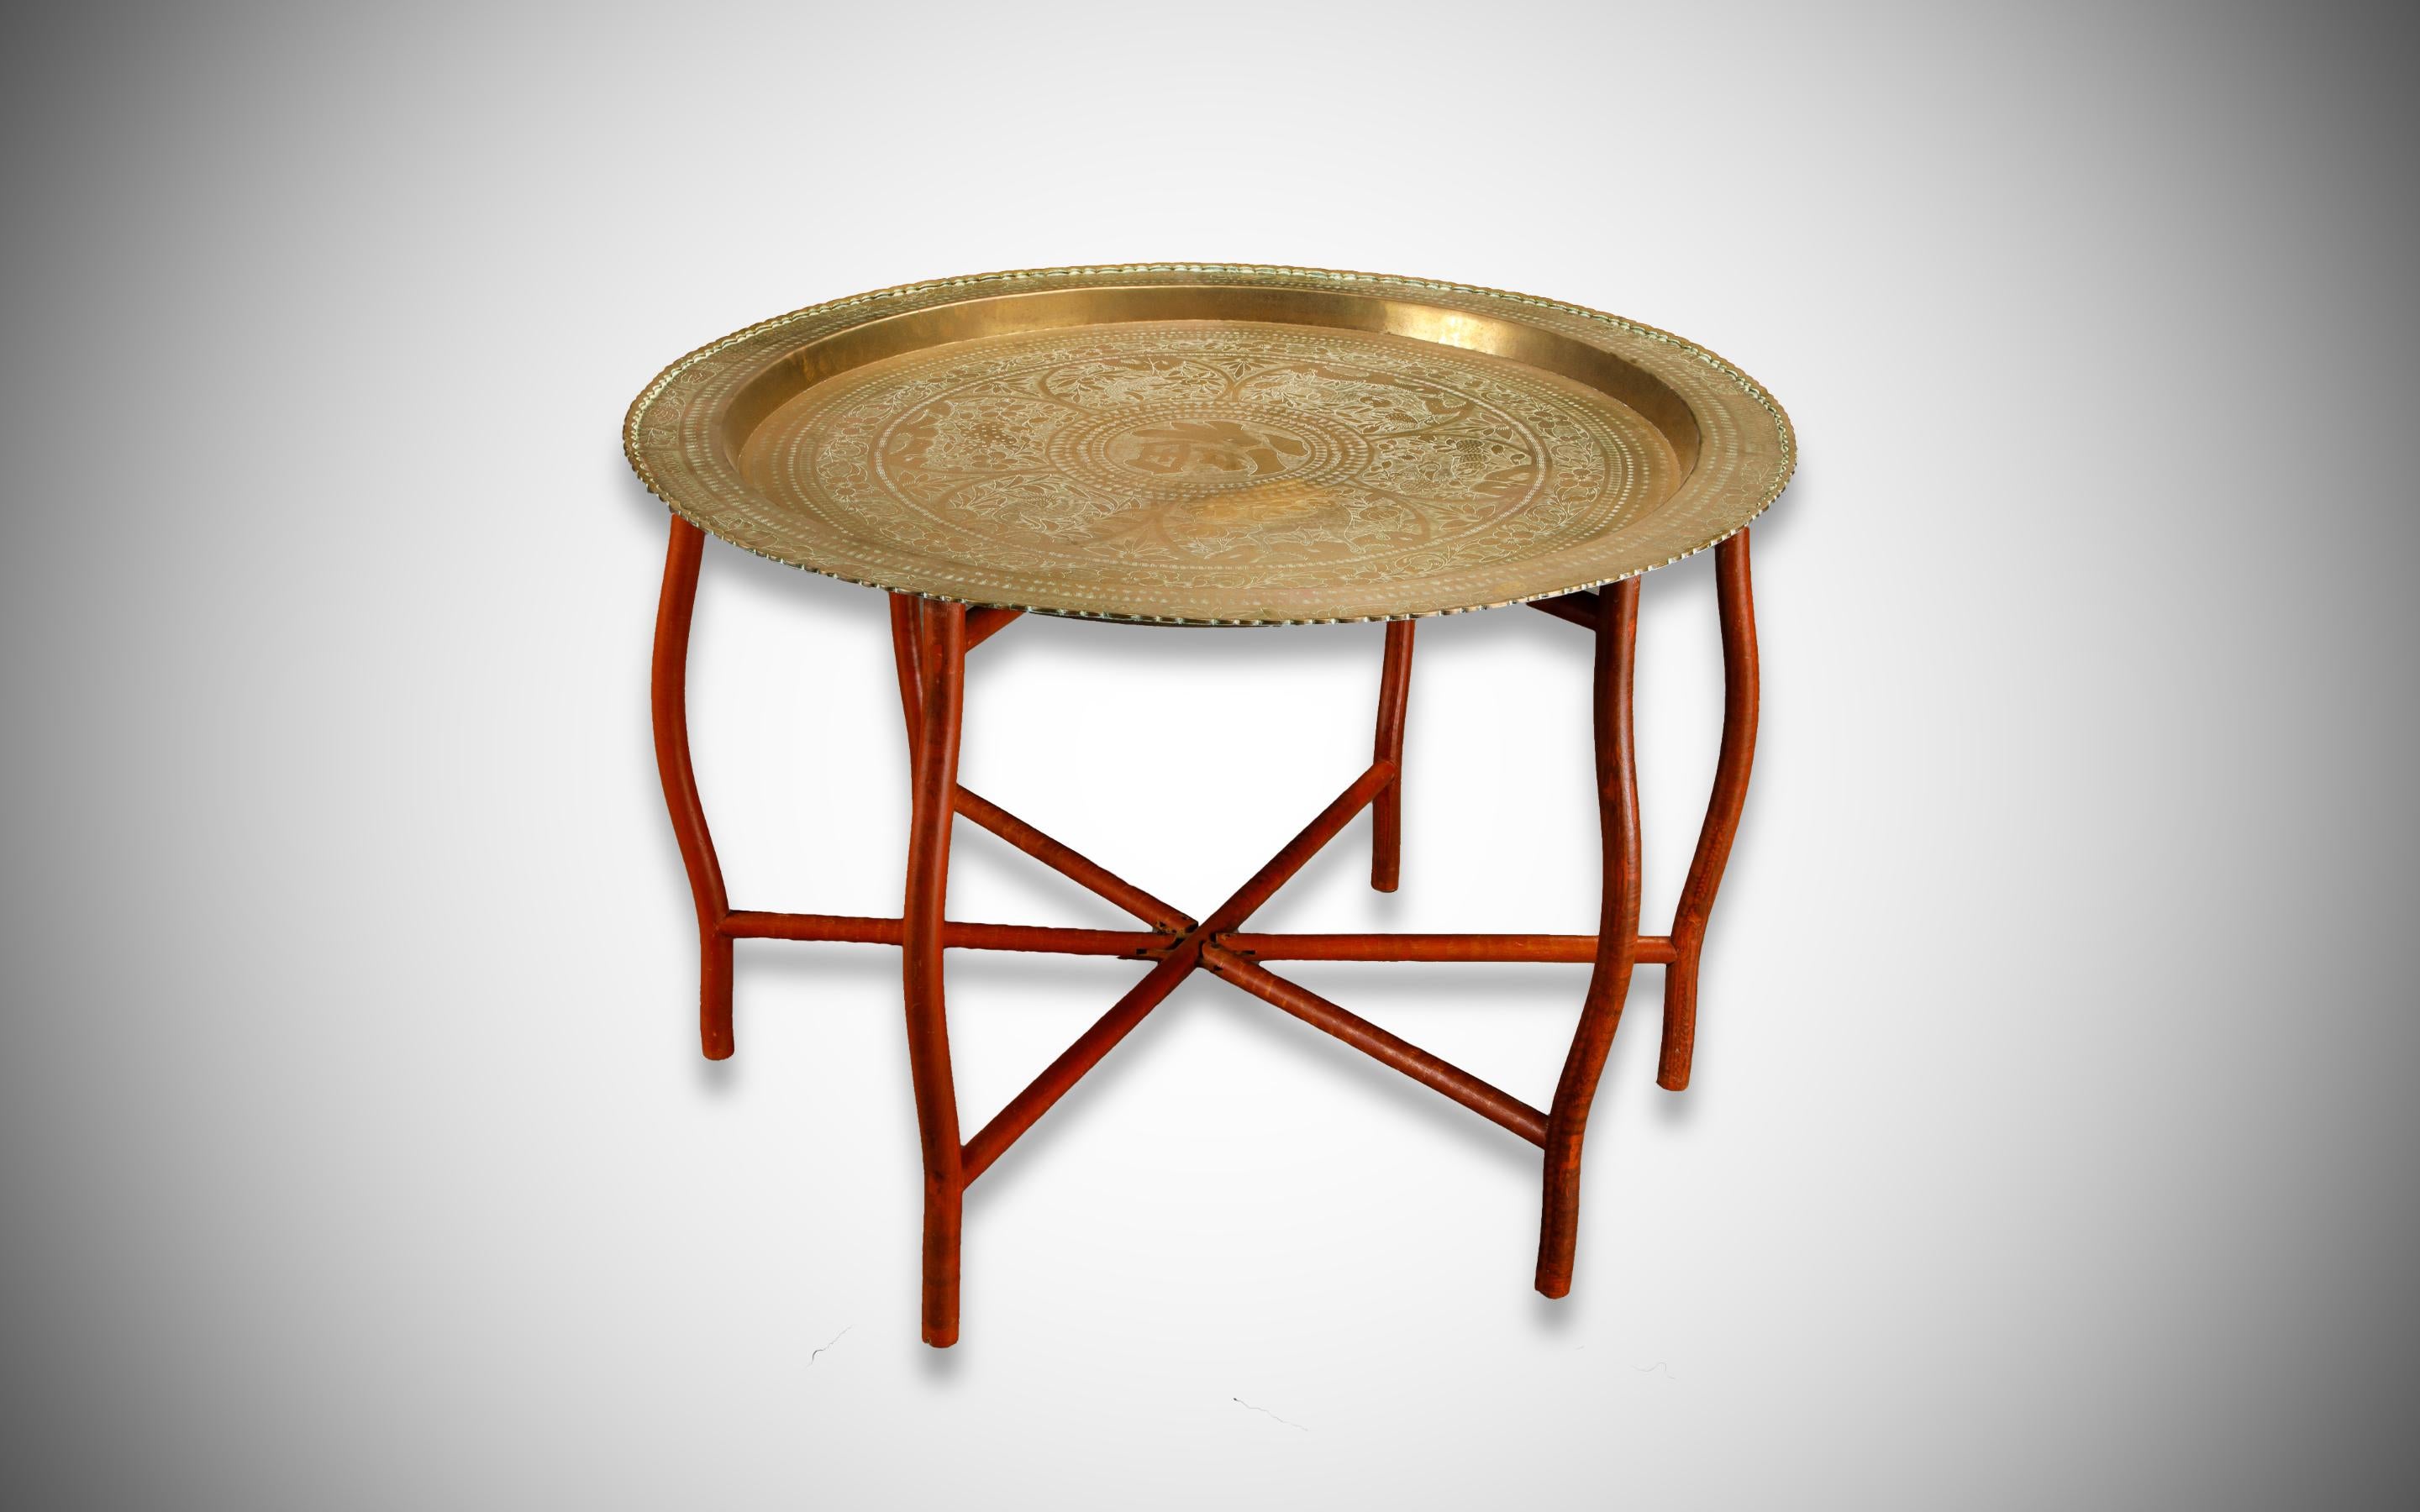 This beautiful Asian tray table features engraved and hammered brass over a foldable wood base. Works great as a coffee / cocktail table, tea table, portable tray for serving (aka serving table), relocatable table for Zoom meetings, and more.